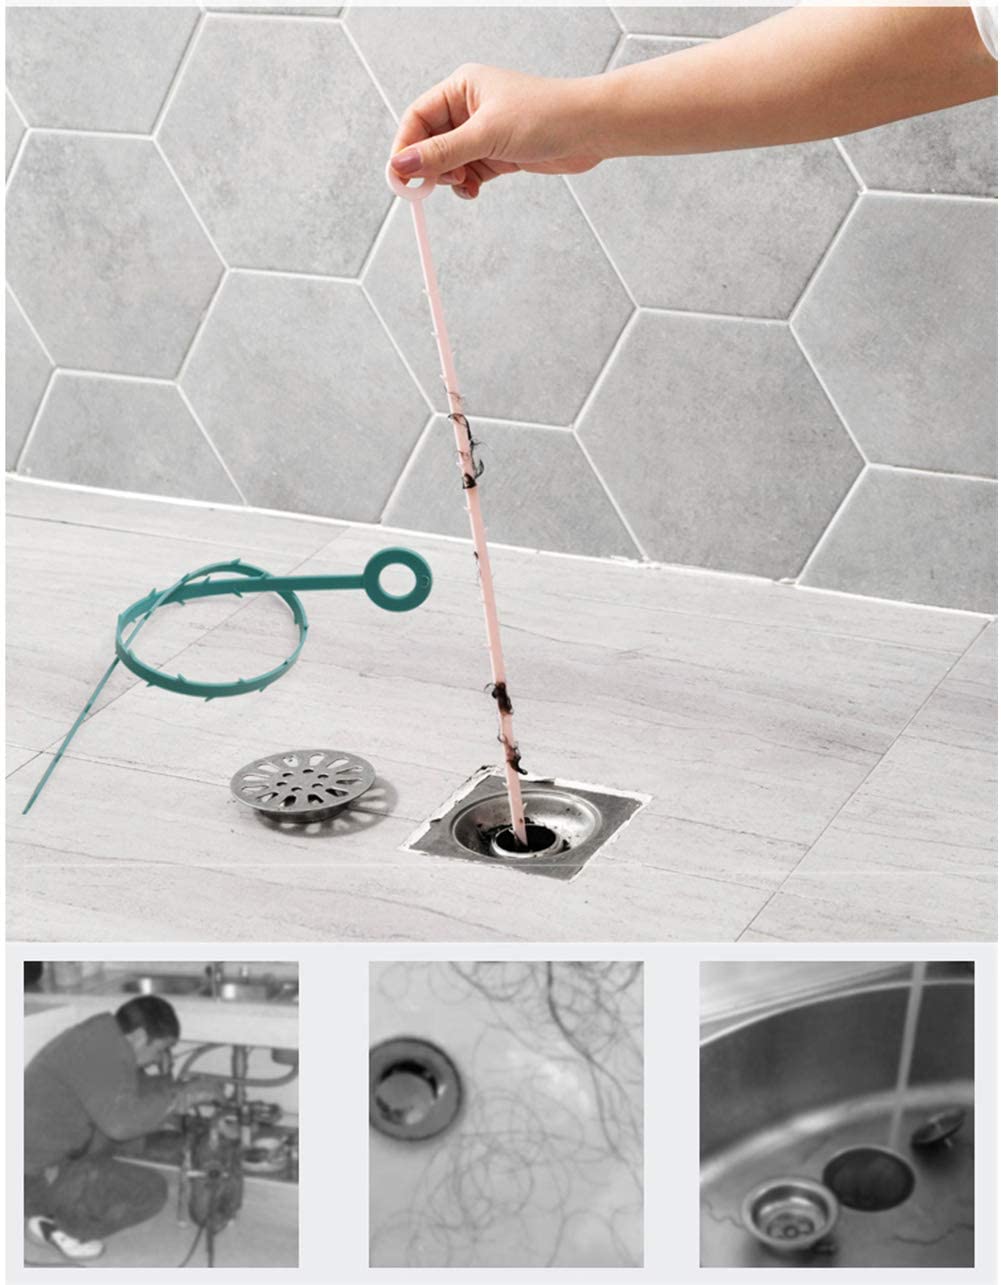 Hair Drain Clog Remover Cleaning Tool Pipe Snake Shower drain with